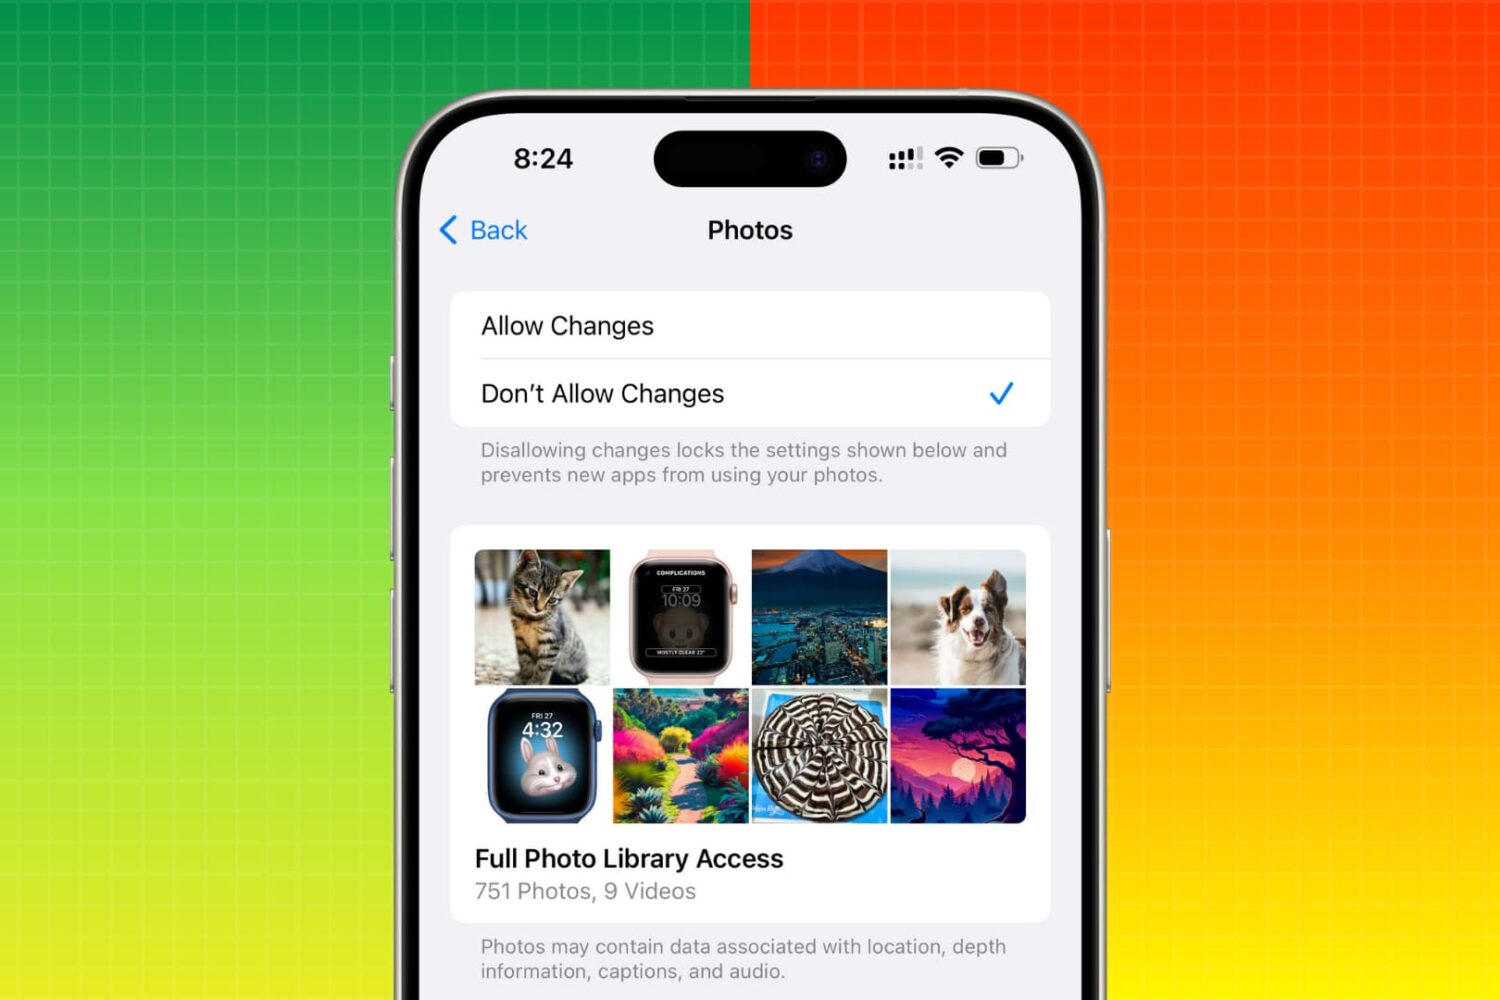 Restrict photo library access for iPhone apps